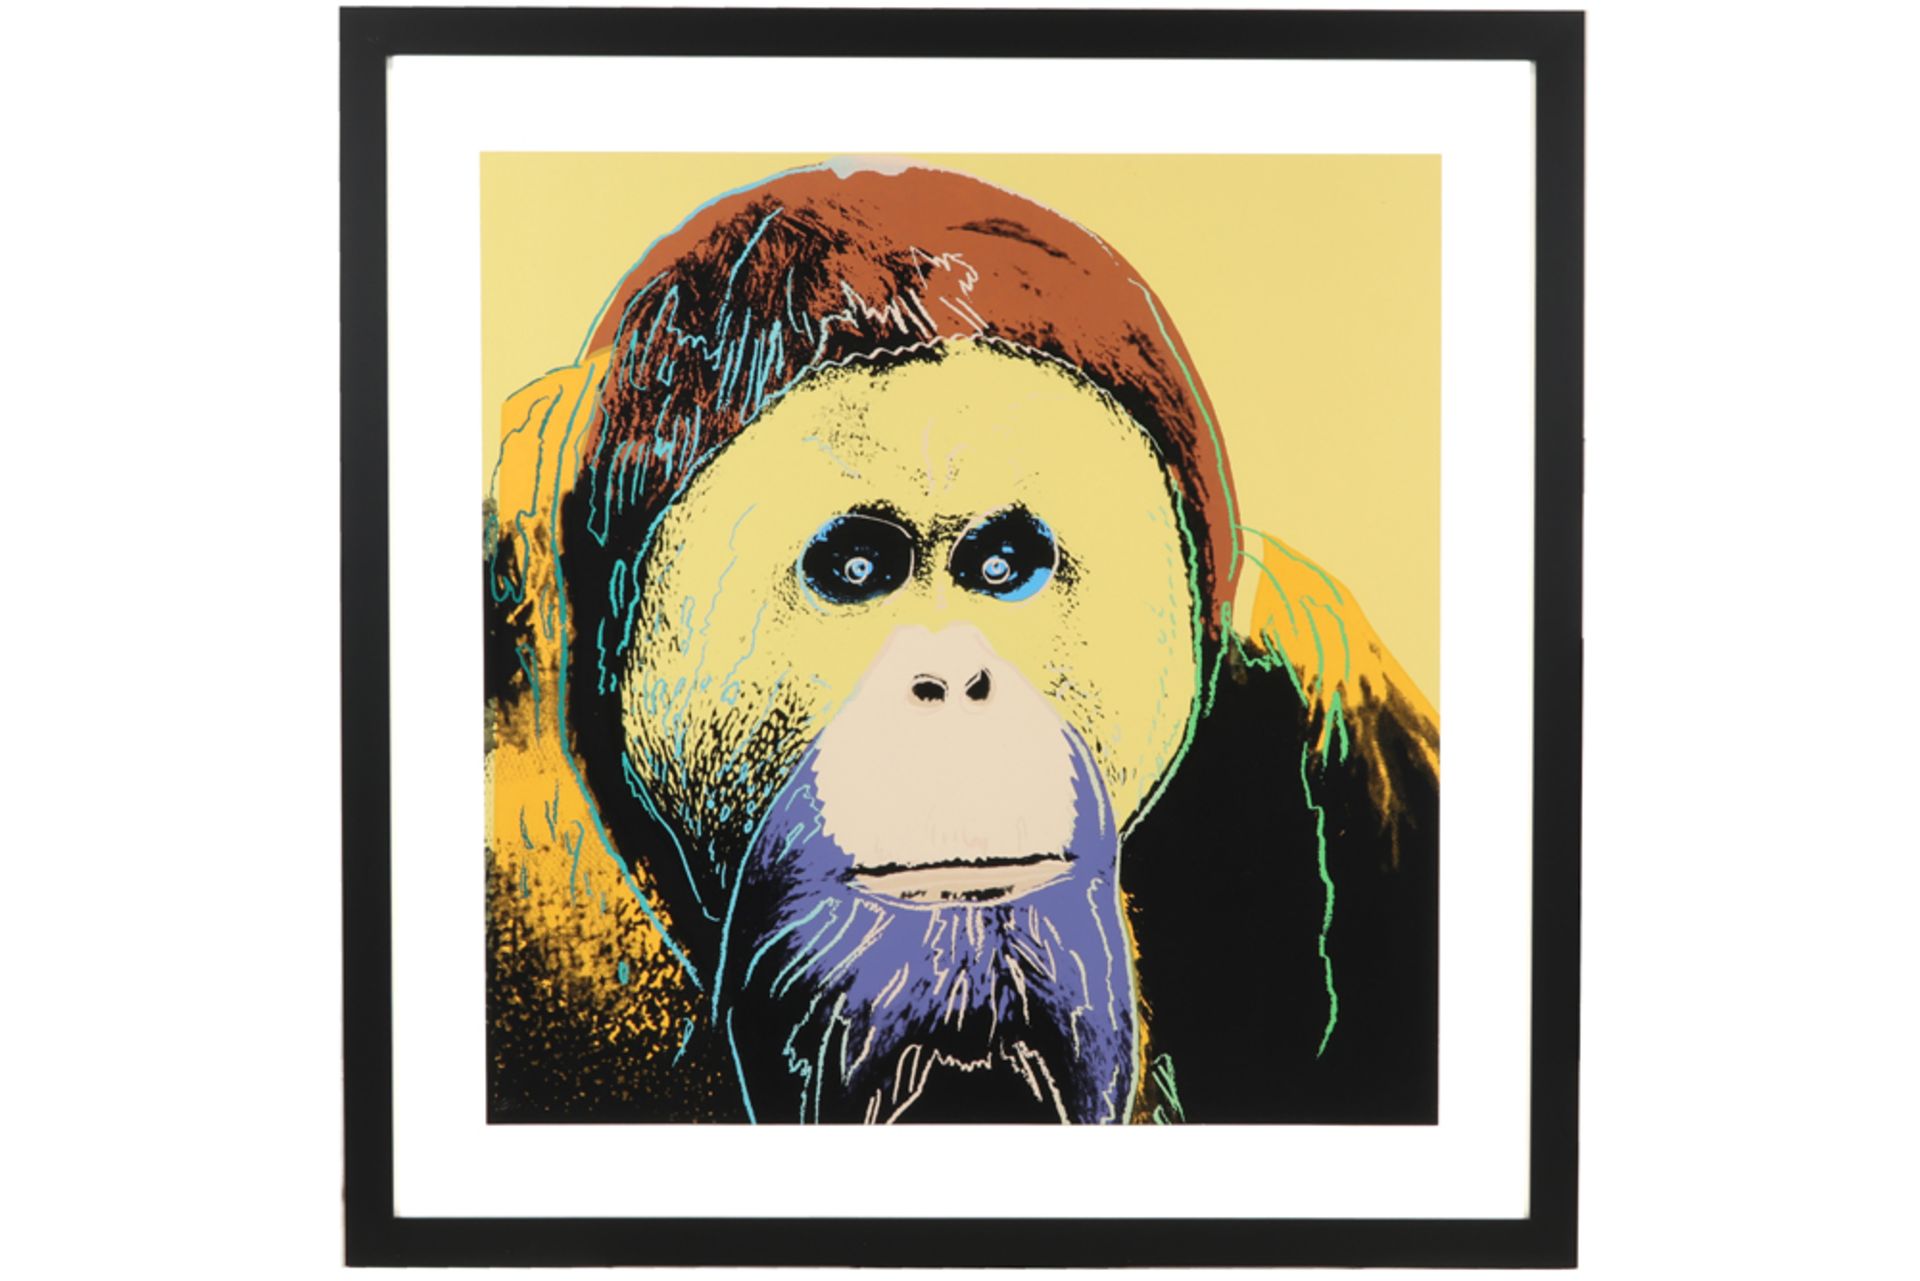 Andy Warhol "Urang Utan" silkscreen from the series "Endangered Species" with the blind stamp of - Image 2 of 4